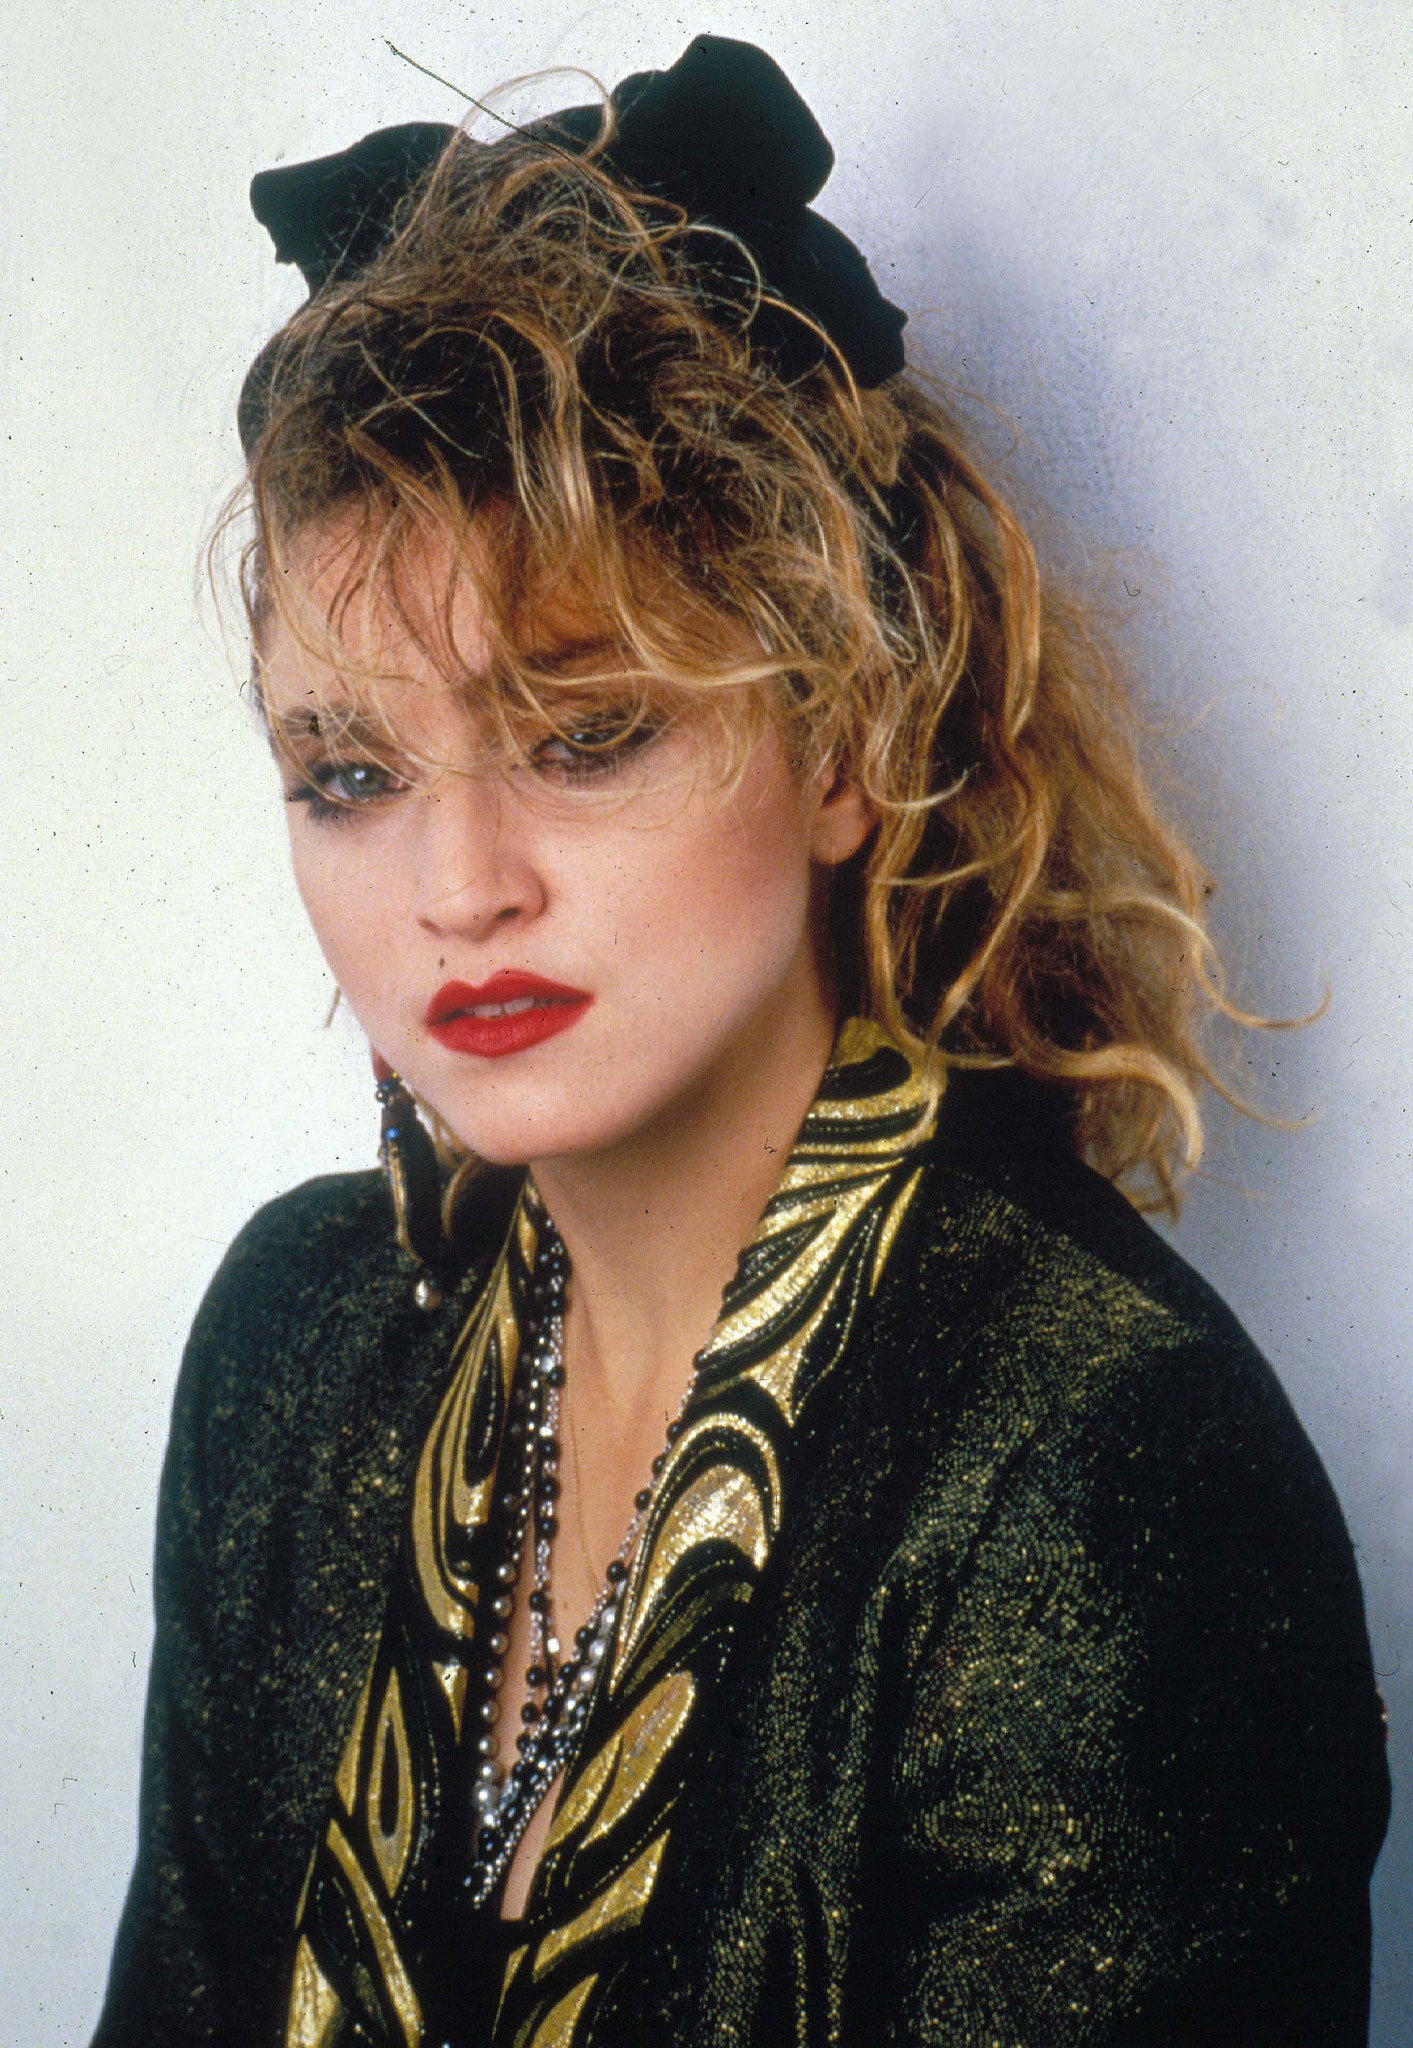 Madonna 👱: Material Girl (1984)  Madonna material girl, Madonna looks,  Madonna young